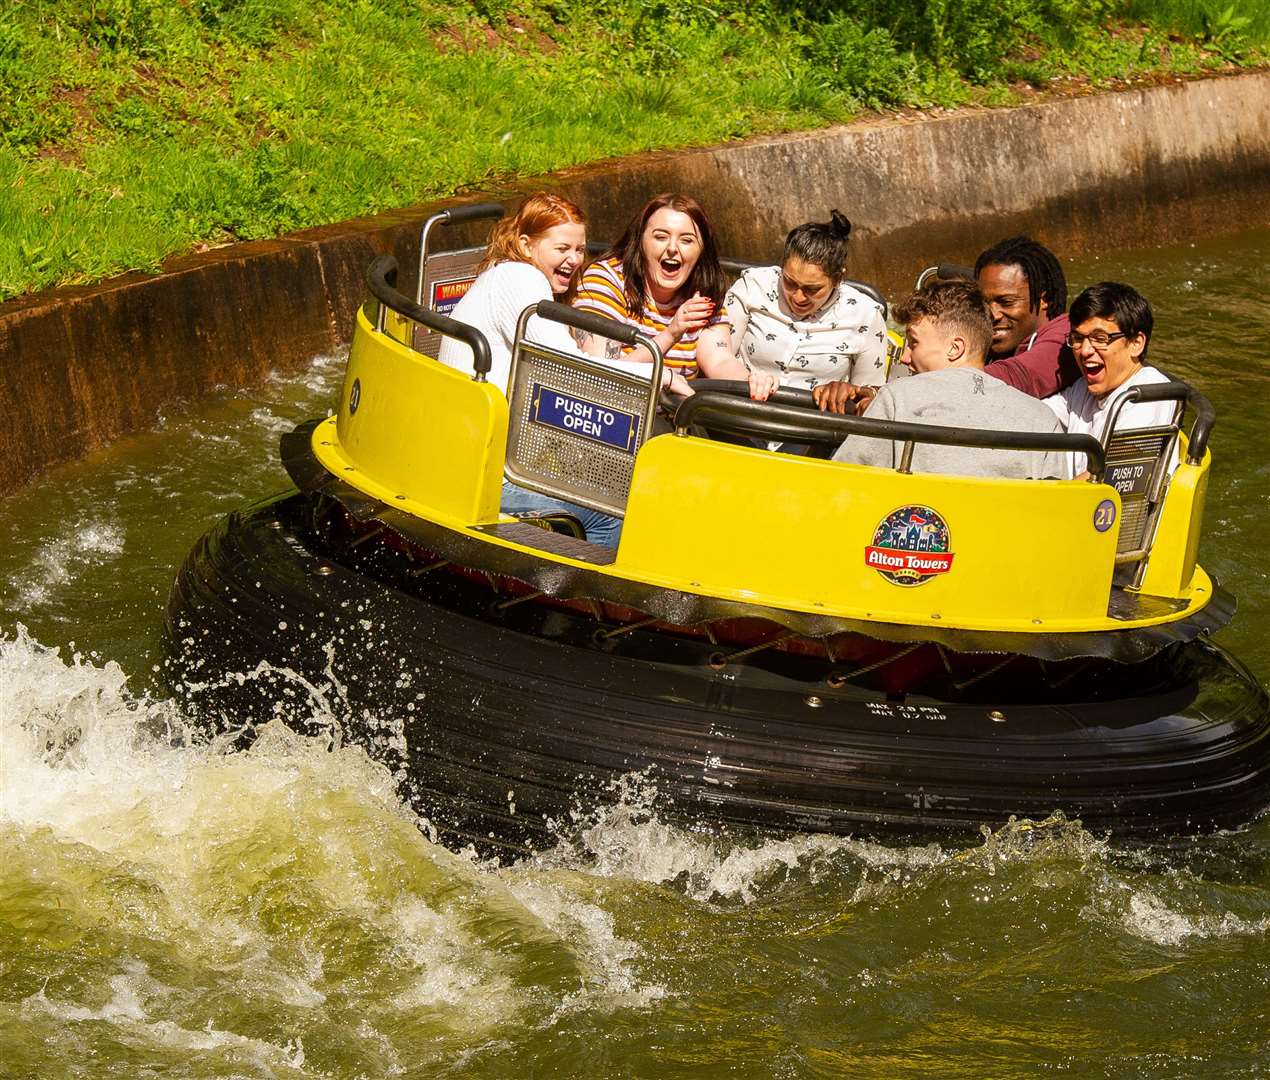 Merlin Entertainment runs Alton Towers and other rival attractions to the London Resort